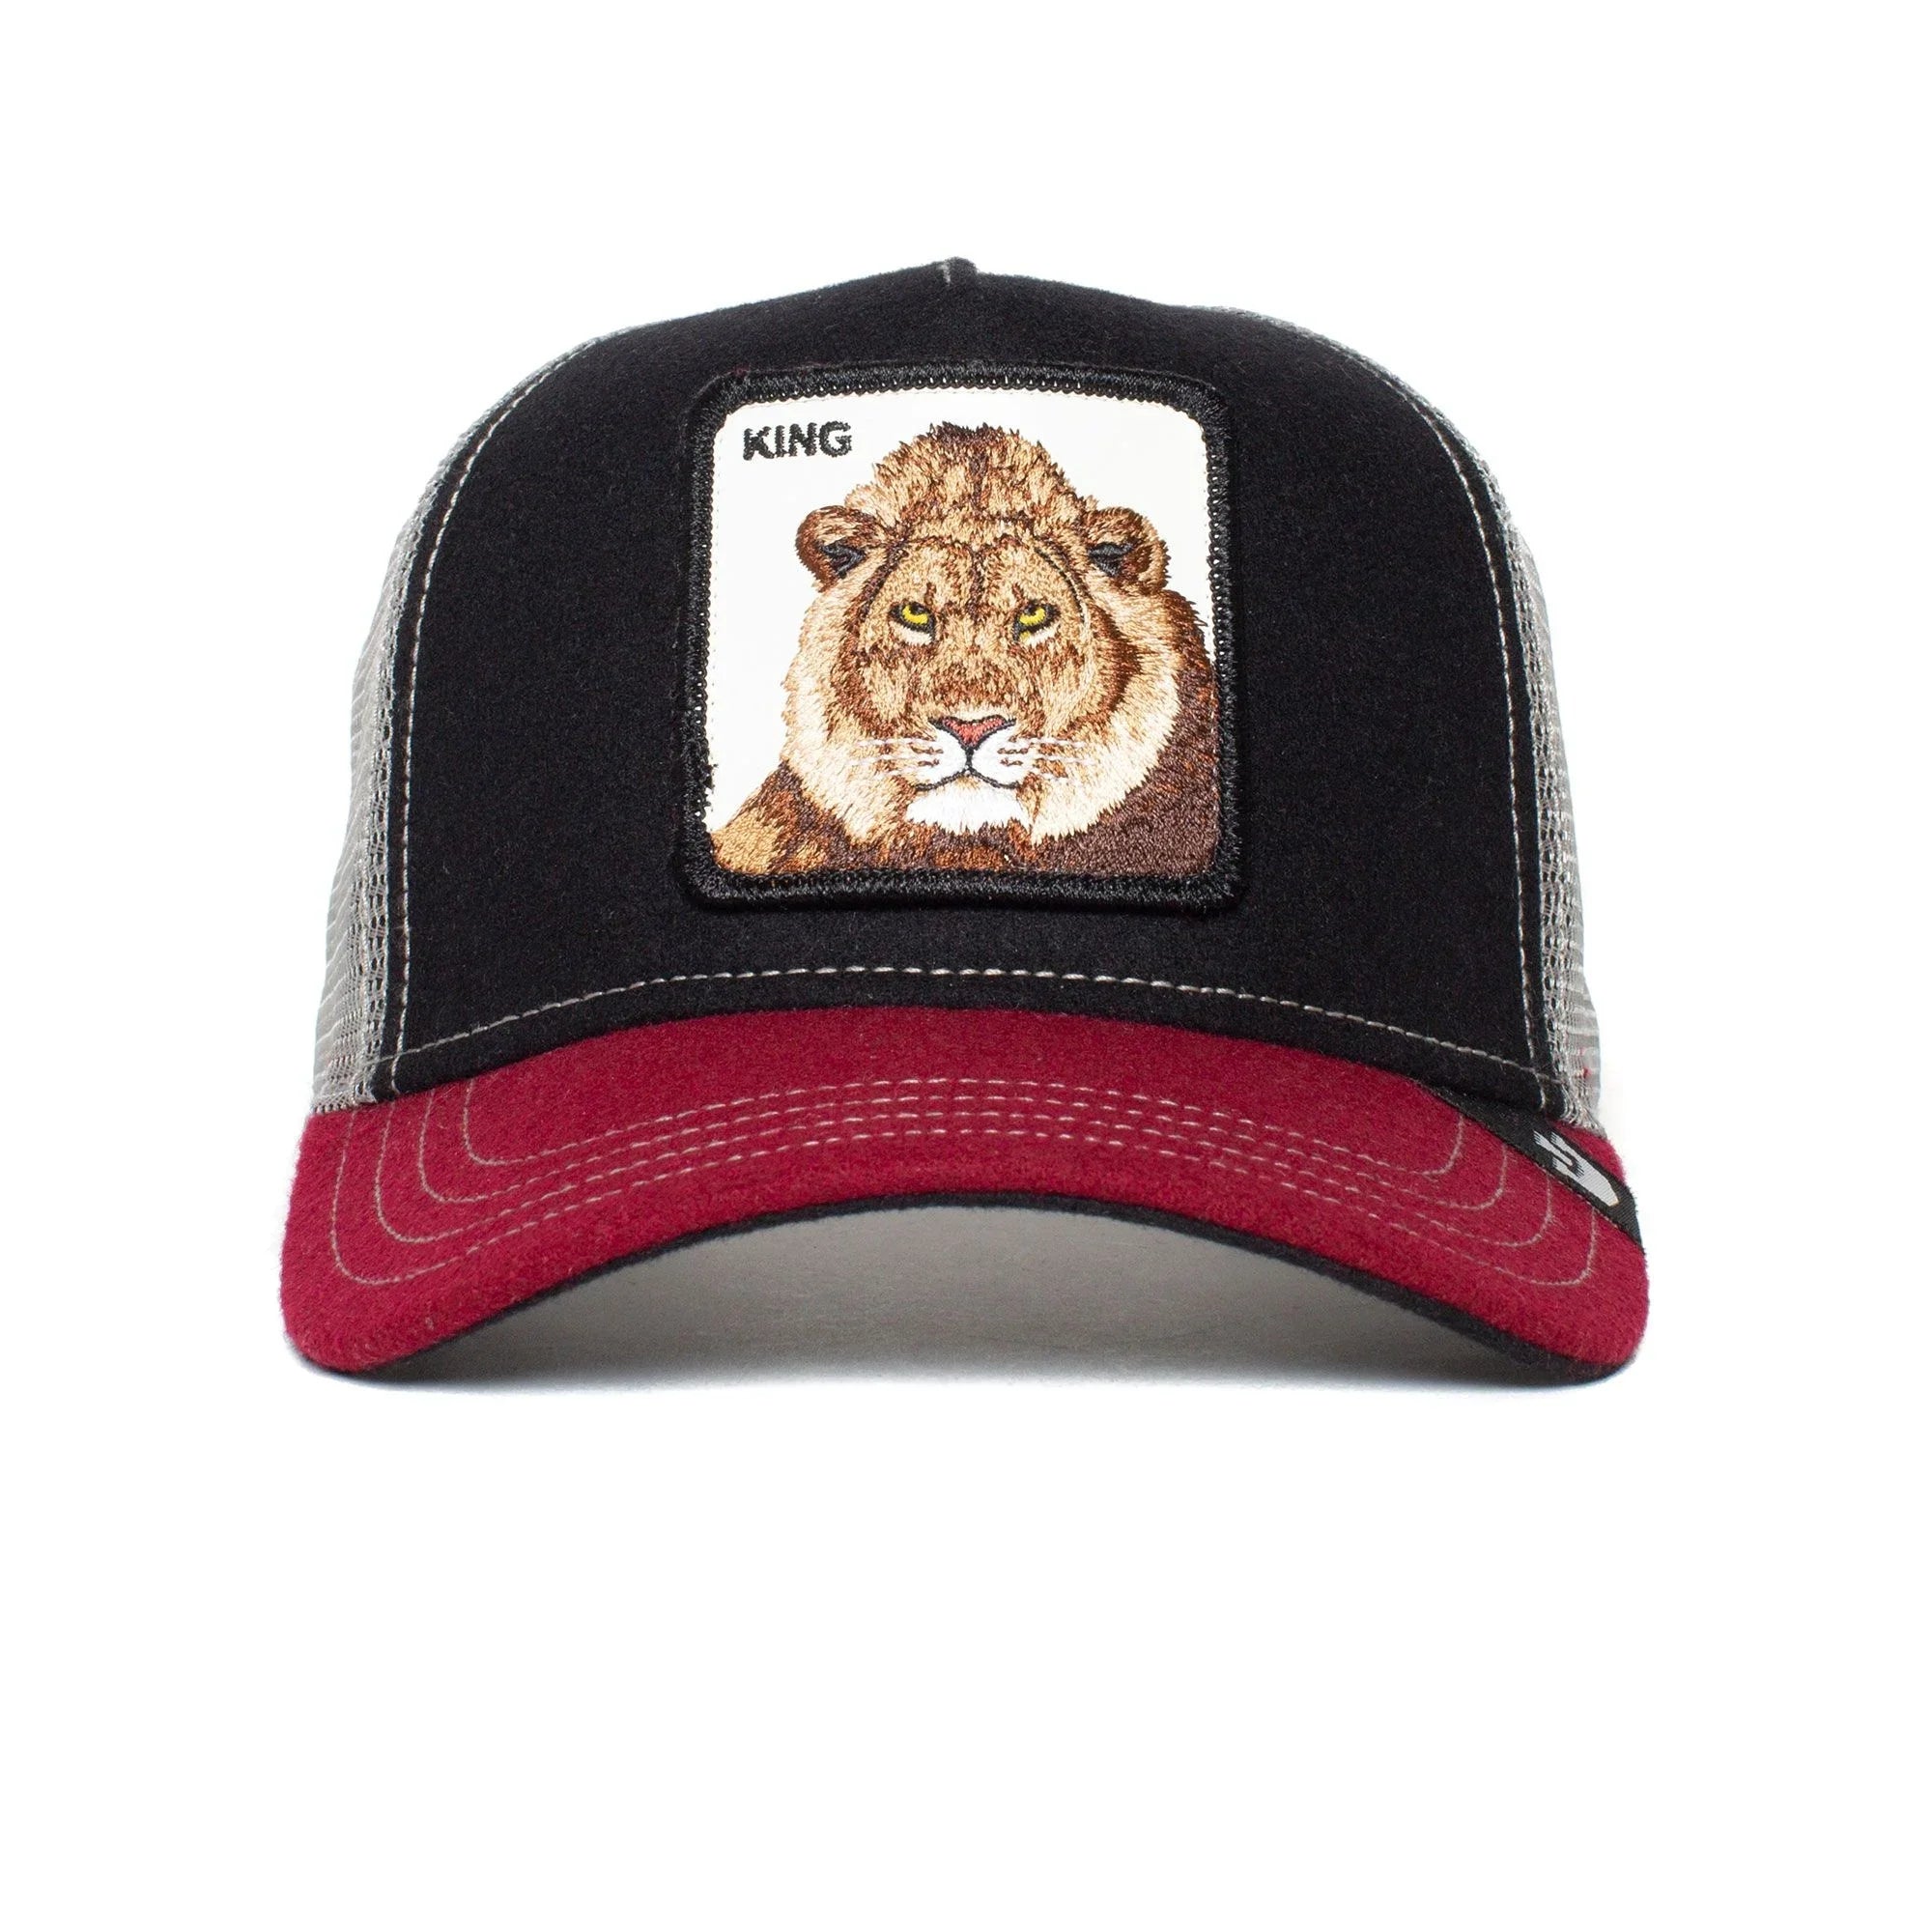 No need to announce yourself when you walk through a door wearing a Goorin' Bros six panel snap-back hat from their Animal Farm collection. 